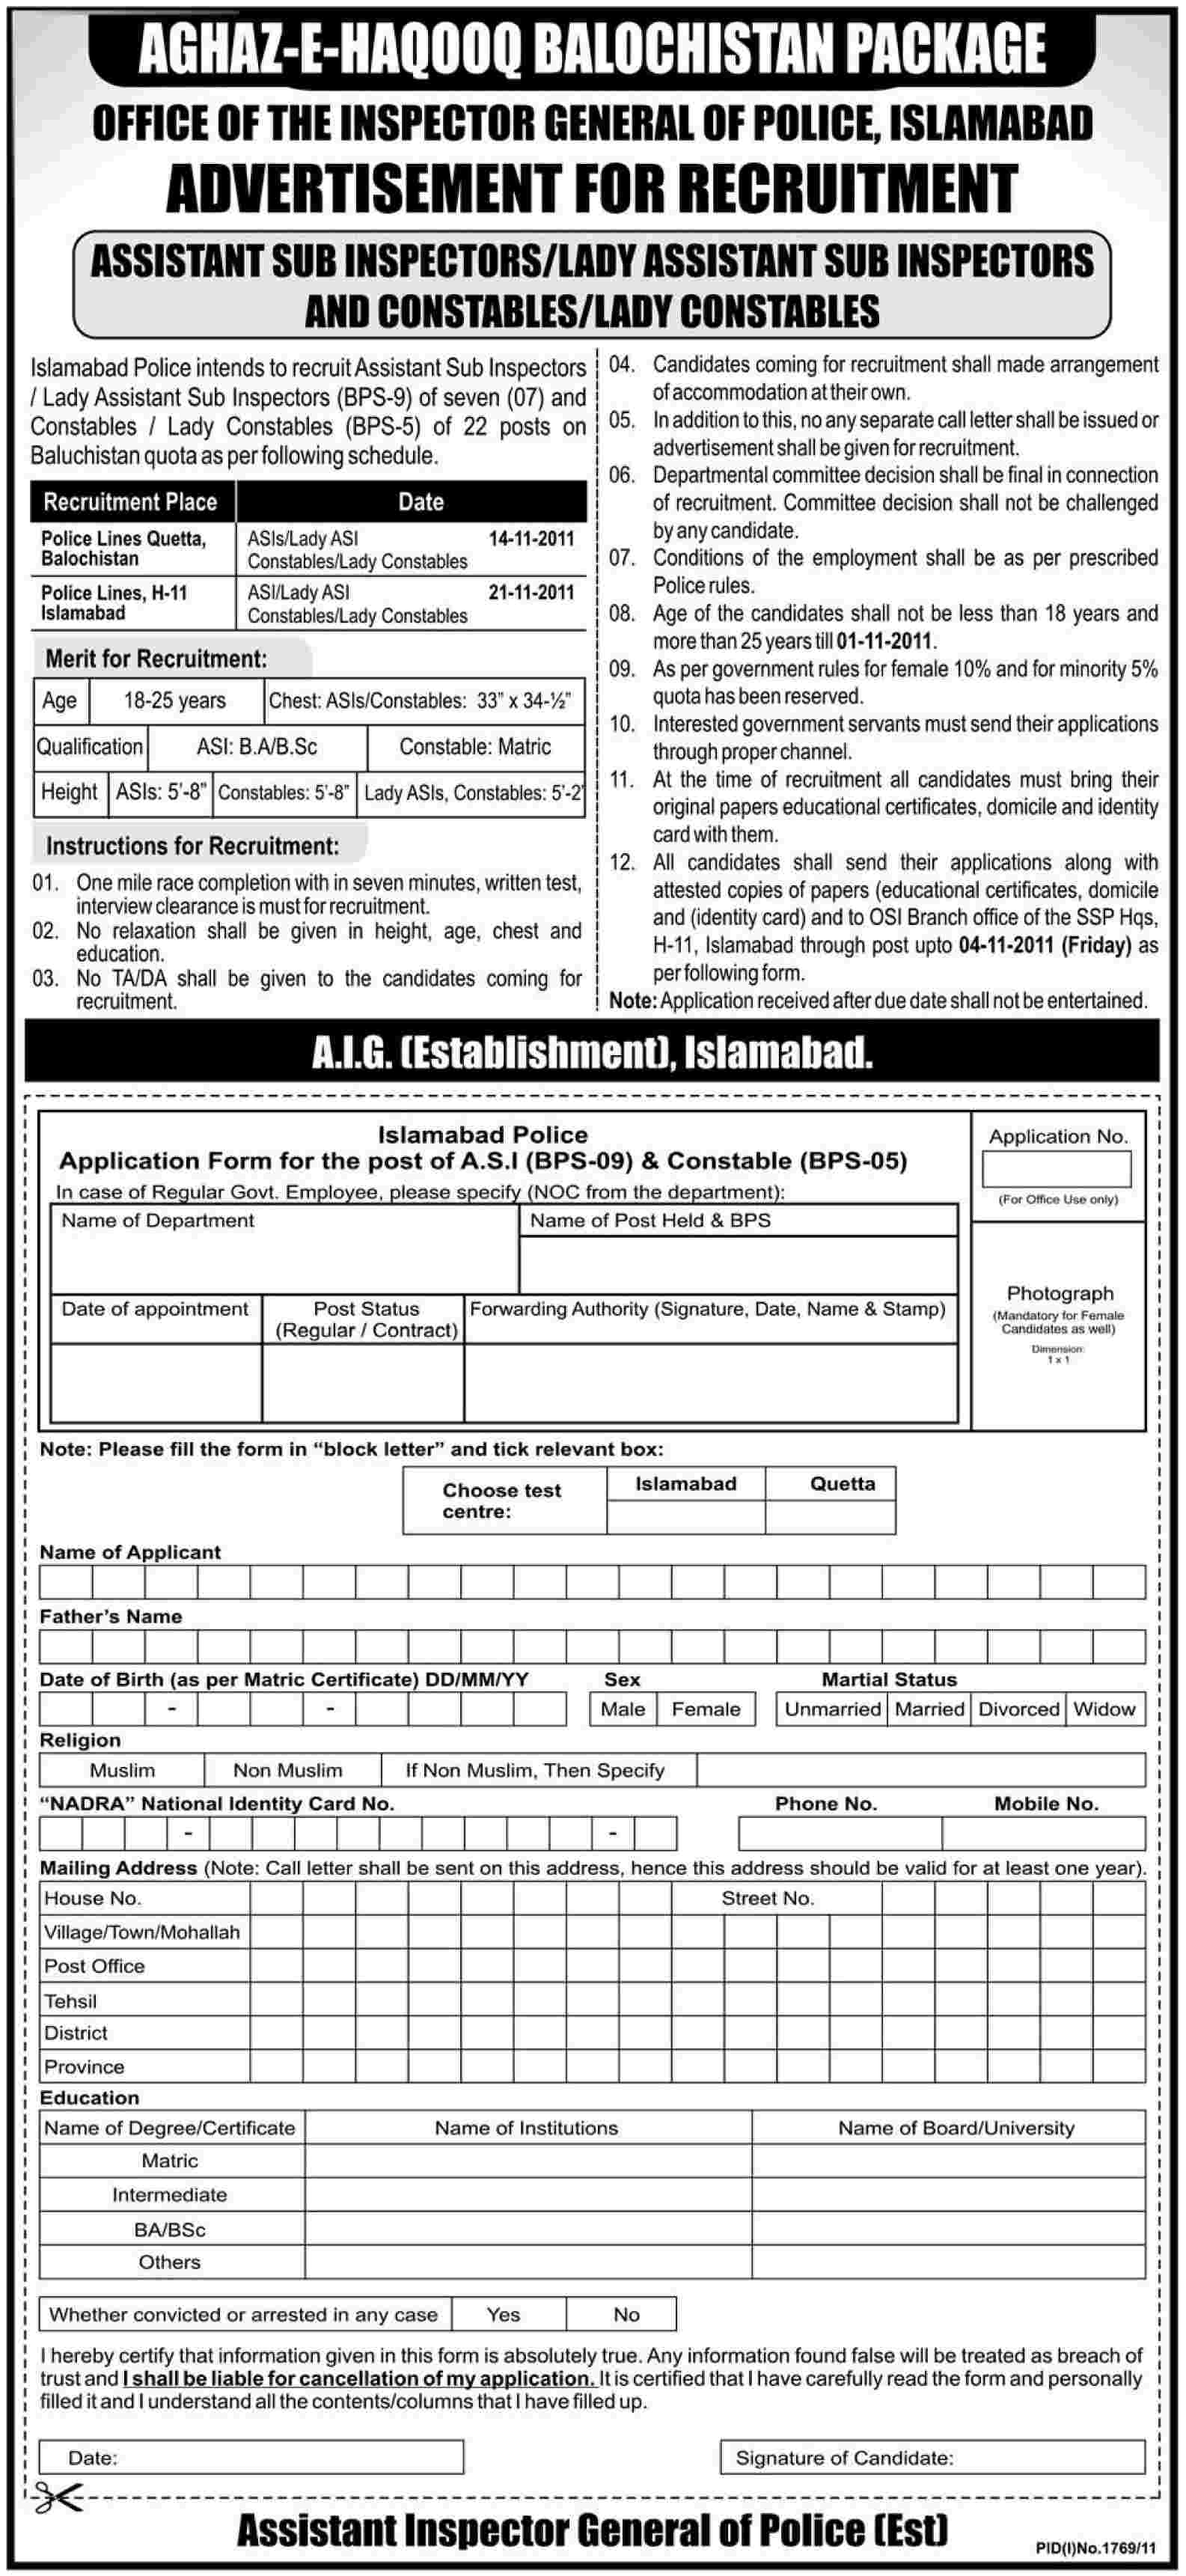 Office of the Inspector General of Police, Islamabad Jobs Opportunities